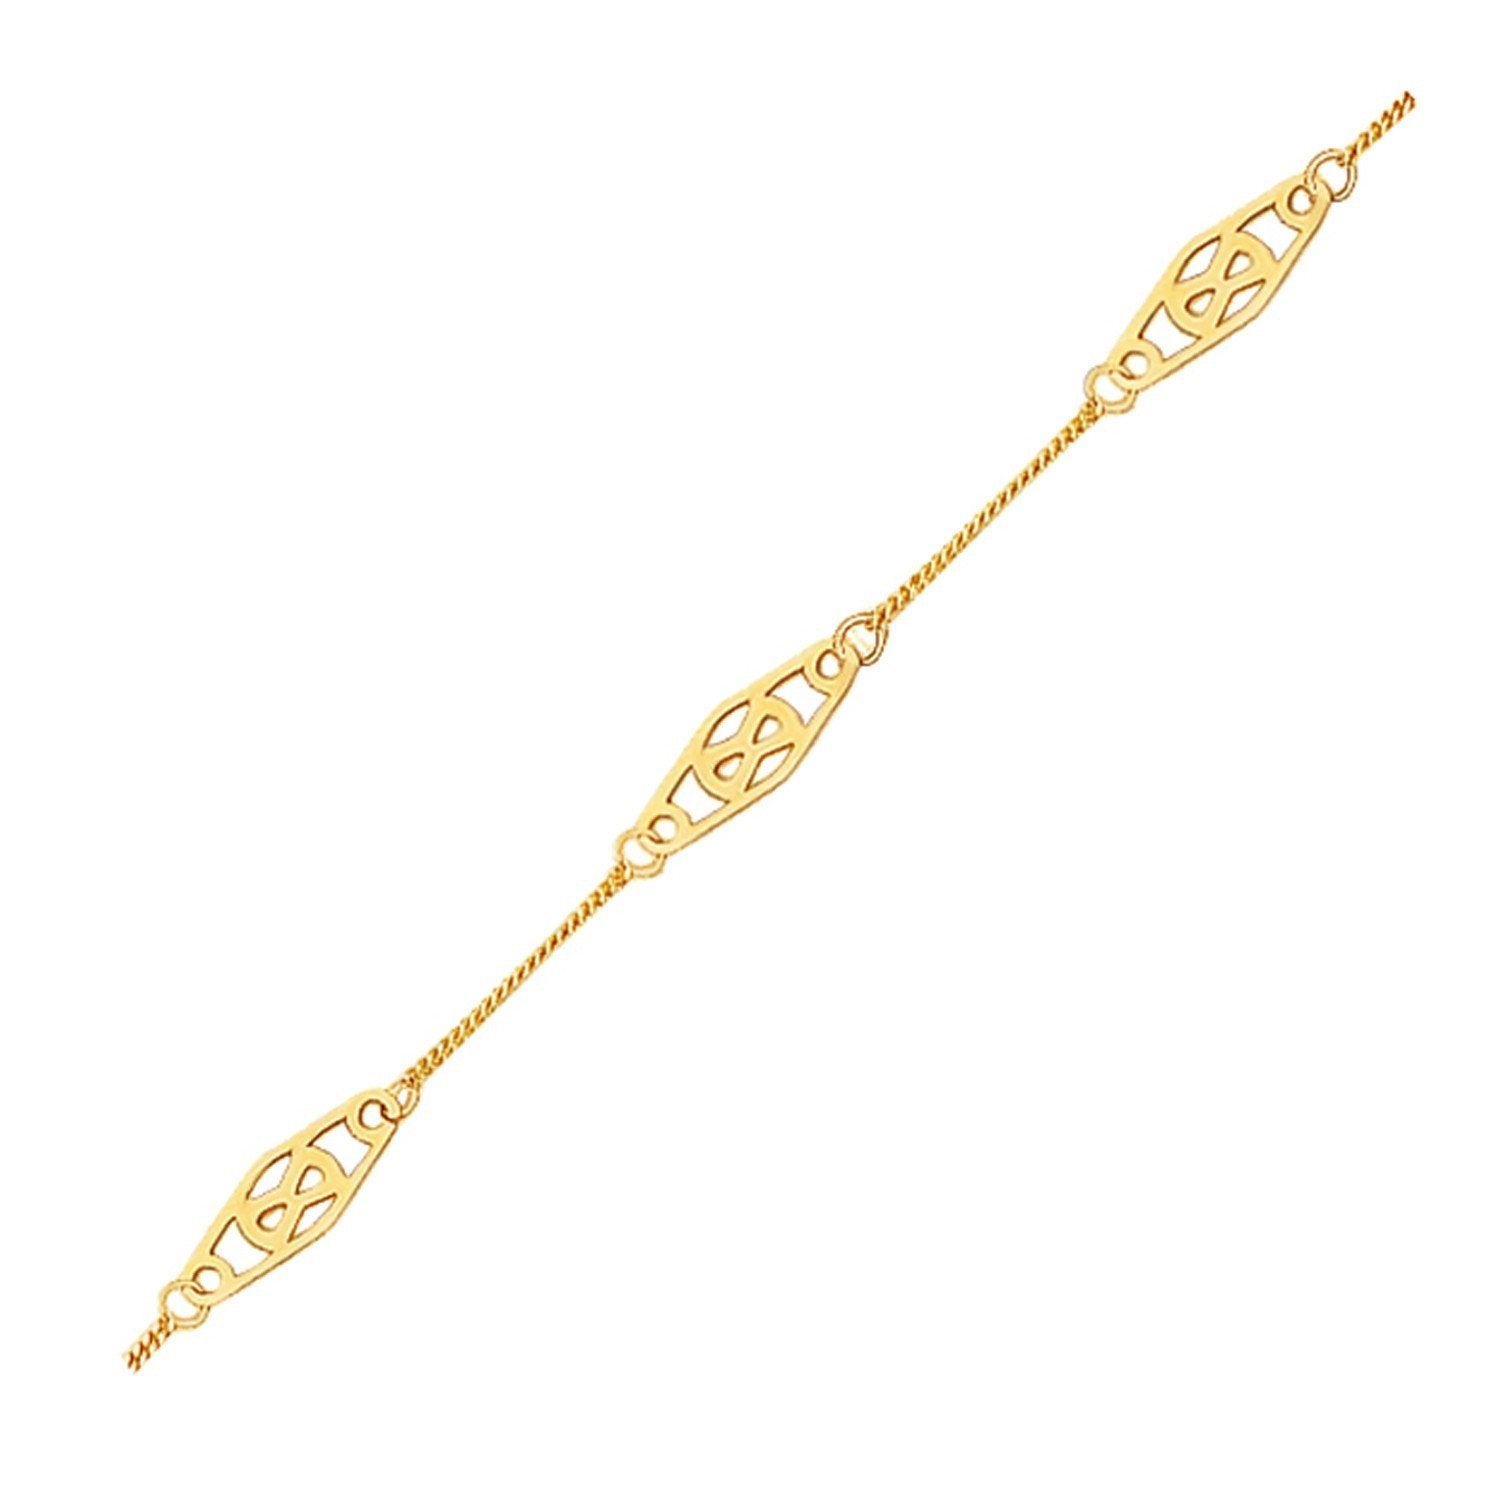 14k Yellow Gold Anklet with Fancy Diamond Shape Filigree Stations, size 10''